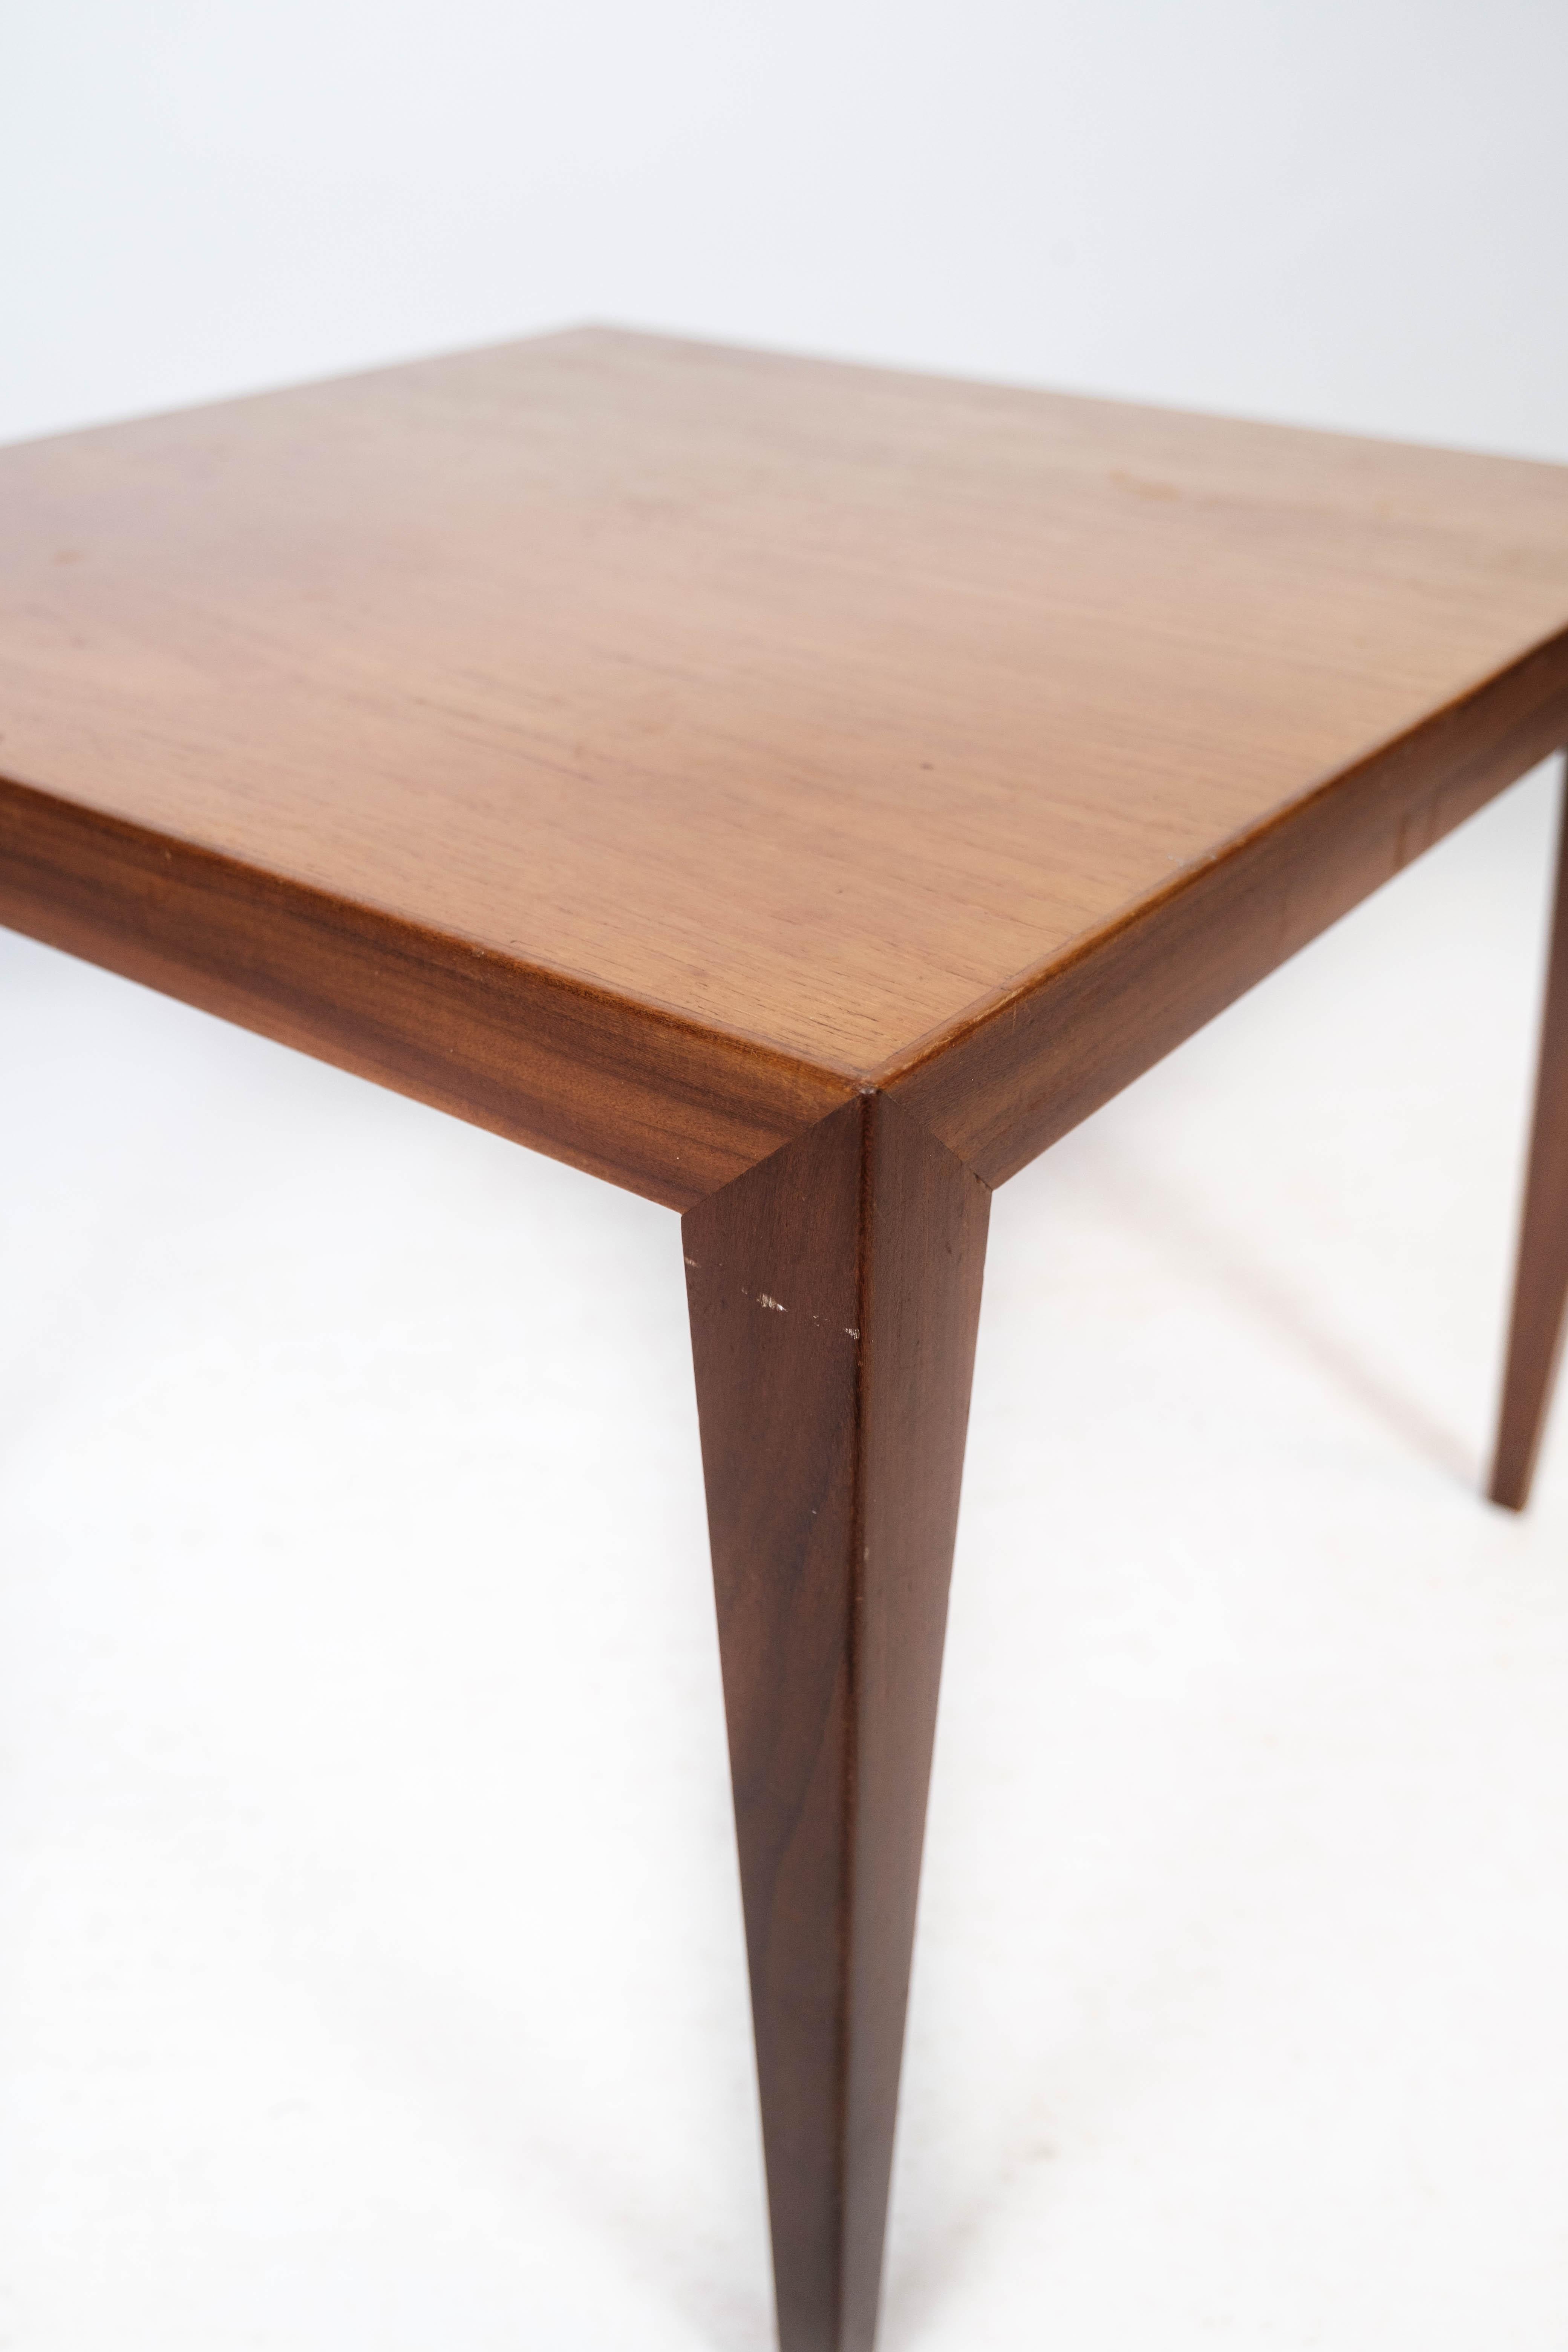 Side Table in Teak of Danish Design Manufactured by Haslev Furniture, 1960s For Sale 3